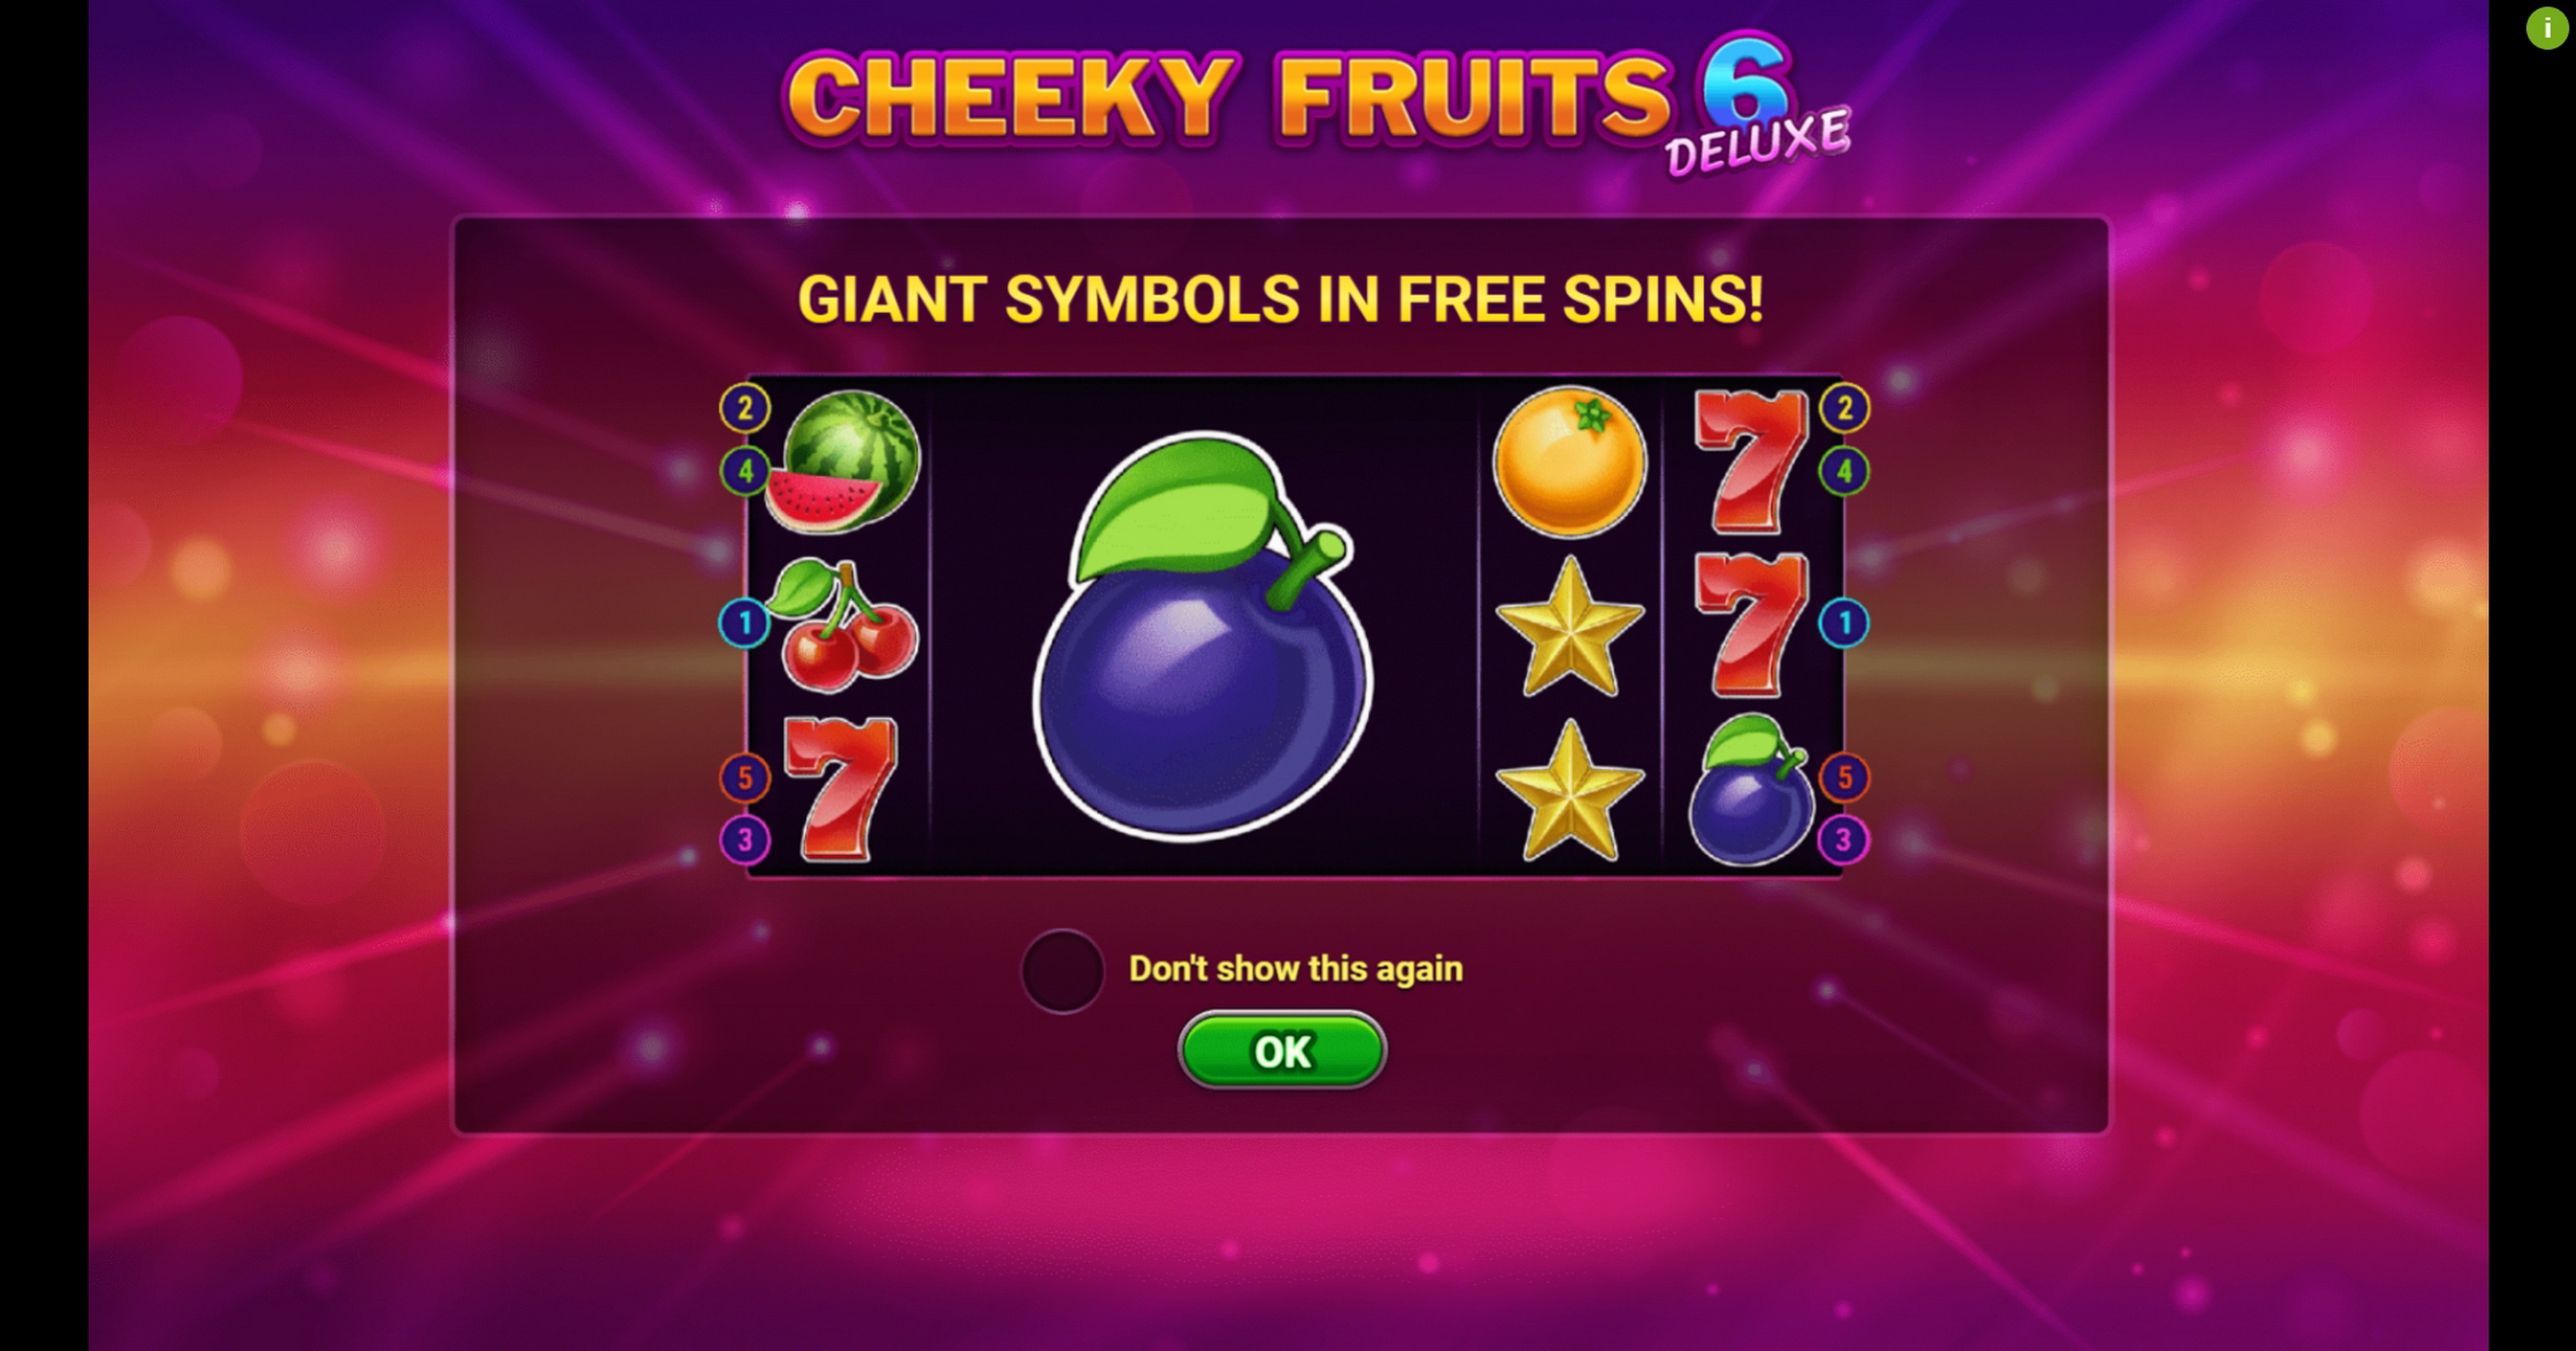 Cheeky Fruits 6 Deluxe demo